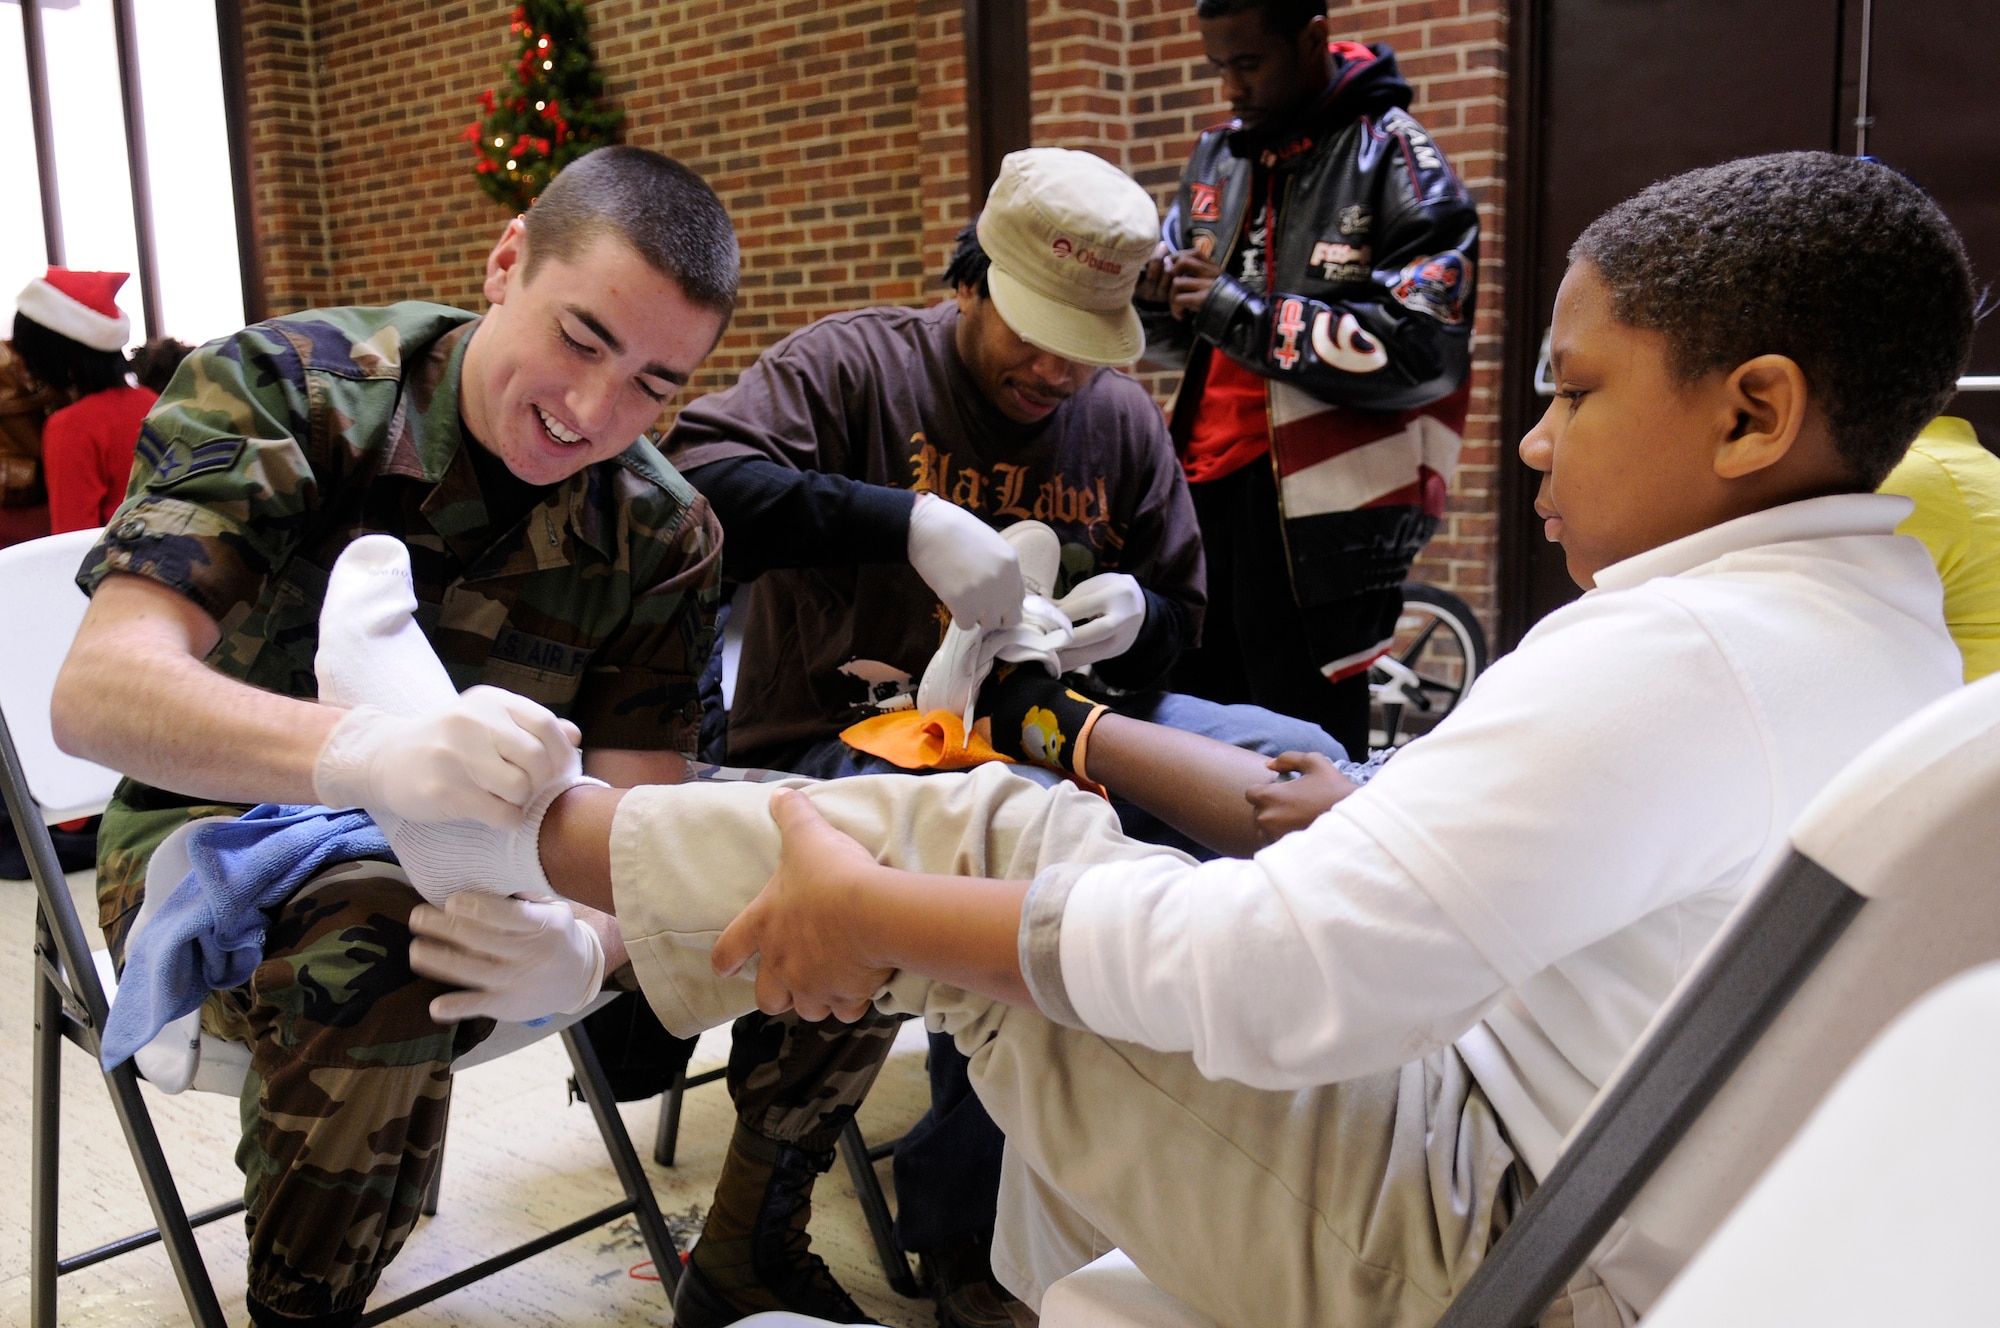 Airman 1st Class Nick Muller, 744th Communications Group, puts new socks on an elementary school student at the 7th District annual Christmas Party Dec. 12, in Washington. Eighteen Airmen from Bolling AFB and the Pentagon volunteered to put shoes on the feet of 220 children, serve food, wrap gifts and clean up. (U.S. Air Force photo by Staff Sgt. Dan DeCook)